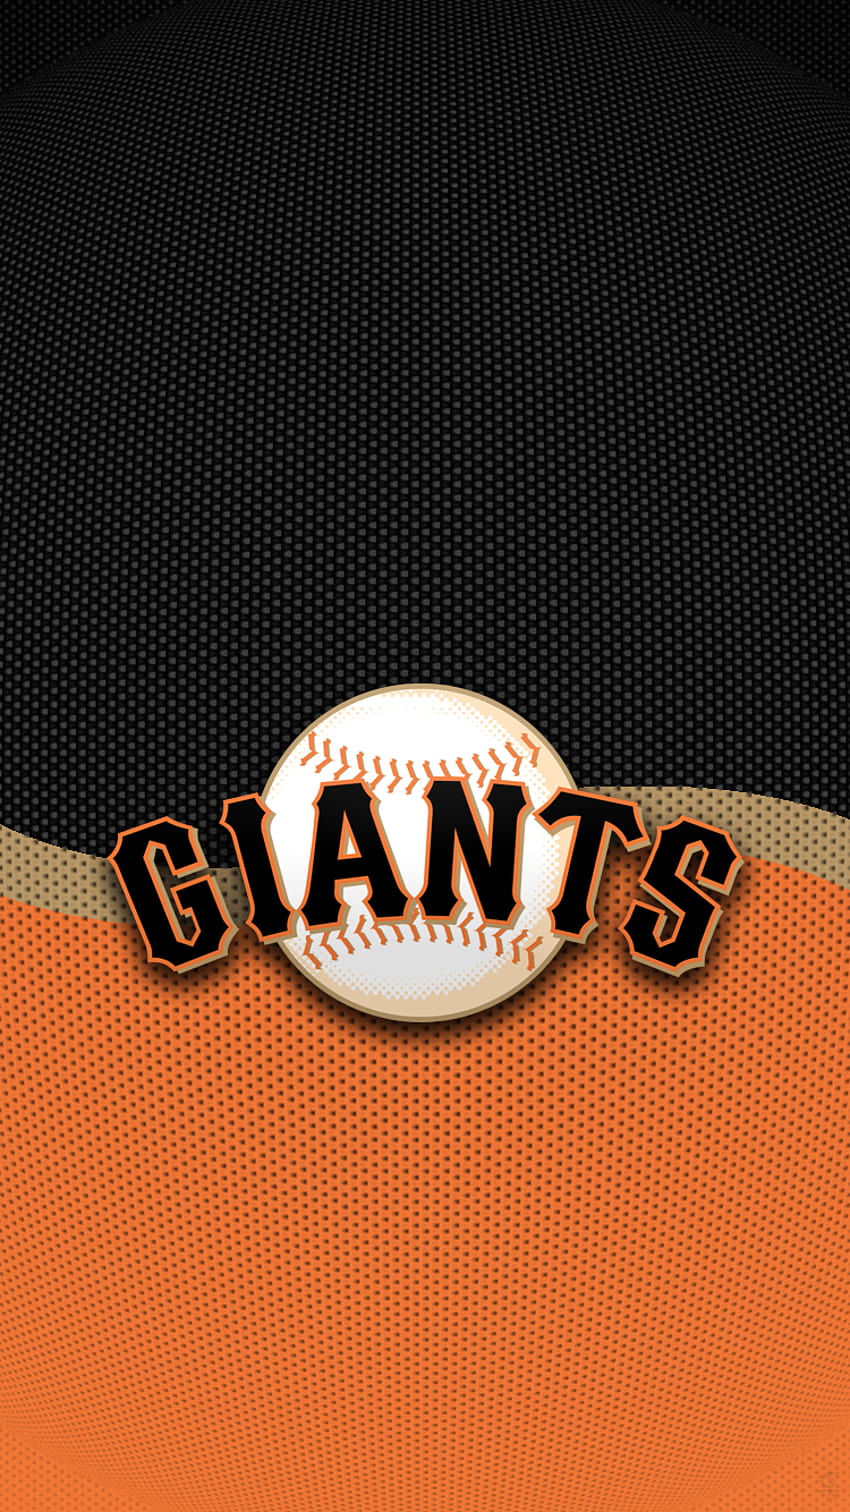 Top 61+ sf giants wallpaper latest - in.cdgdbentre